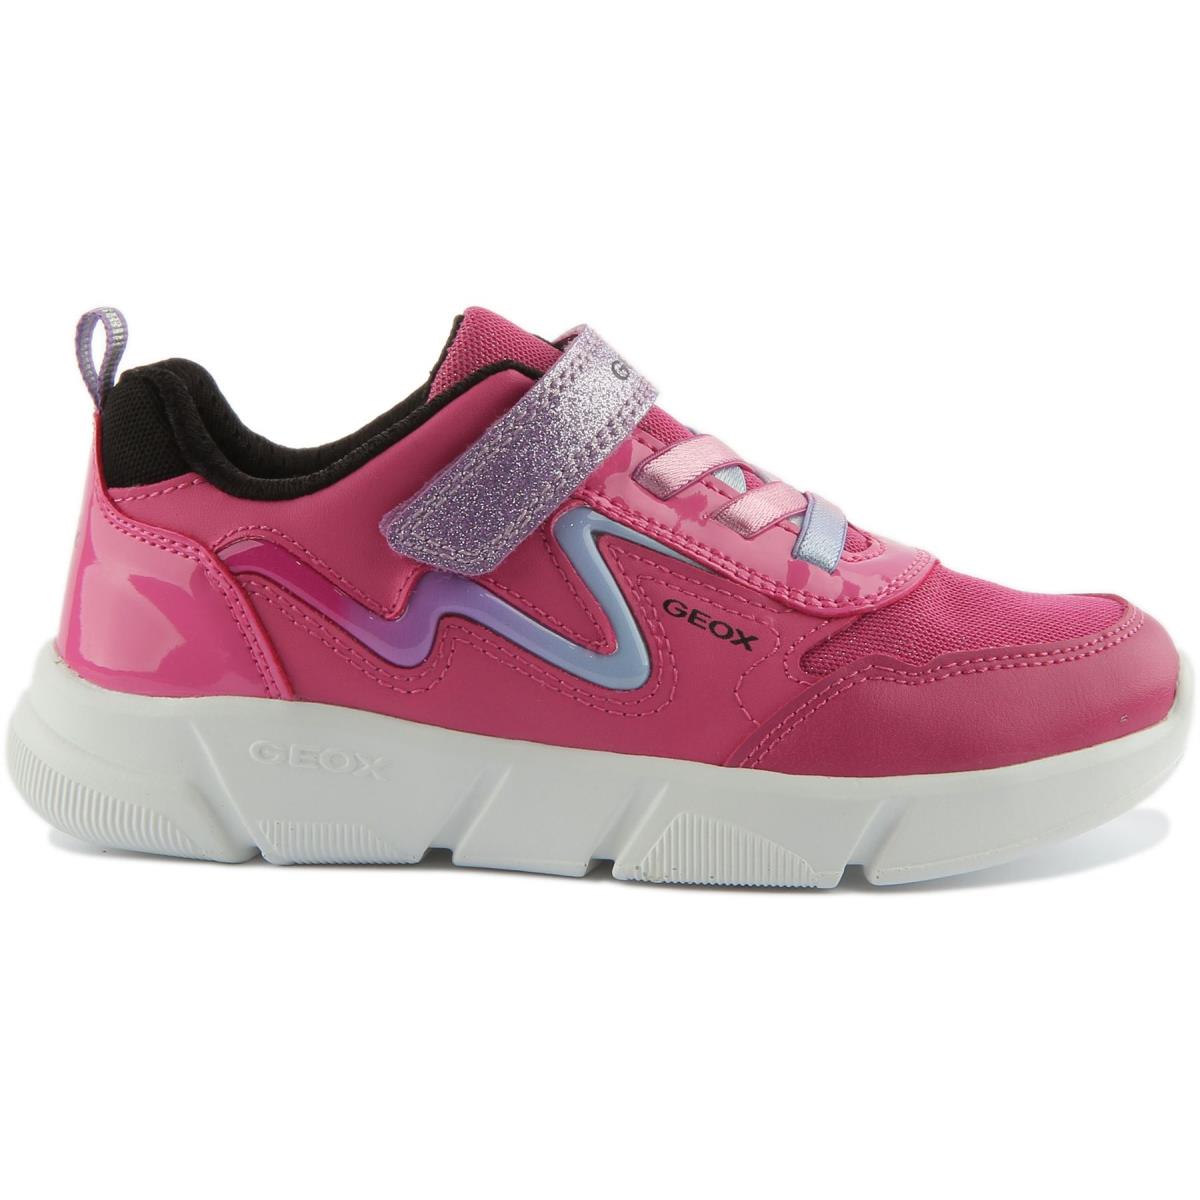 Geox J Aril1 Girls Single Strap Athletic Sneakers In Pink Size US 8 - 4